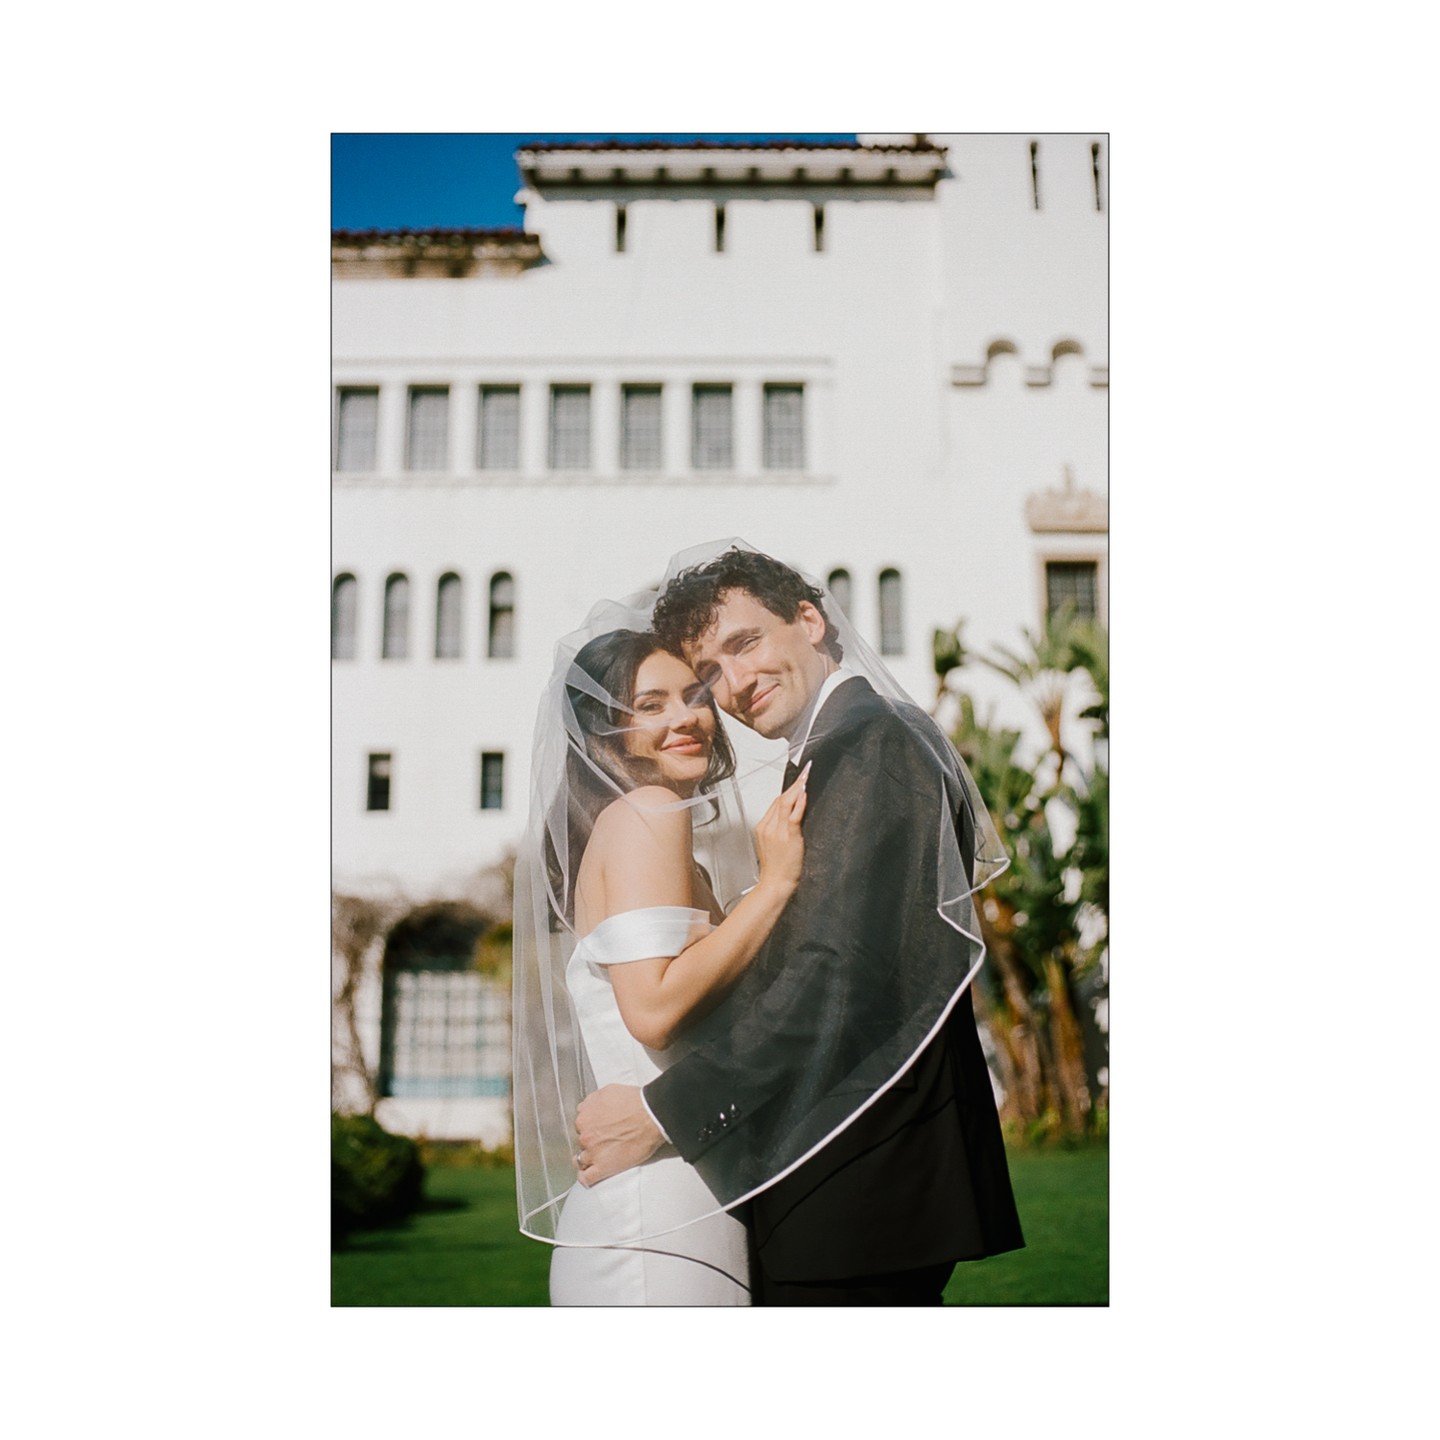 david + sam got married at the santa barbara courthouse on a wednesday surrounded by their families. it was perfect &amp; it will be a while before i stop posting photos of them. congrats you two! 🤍